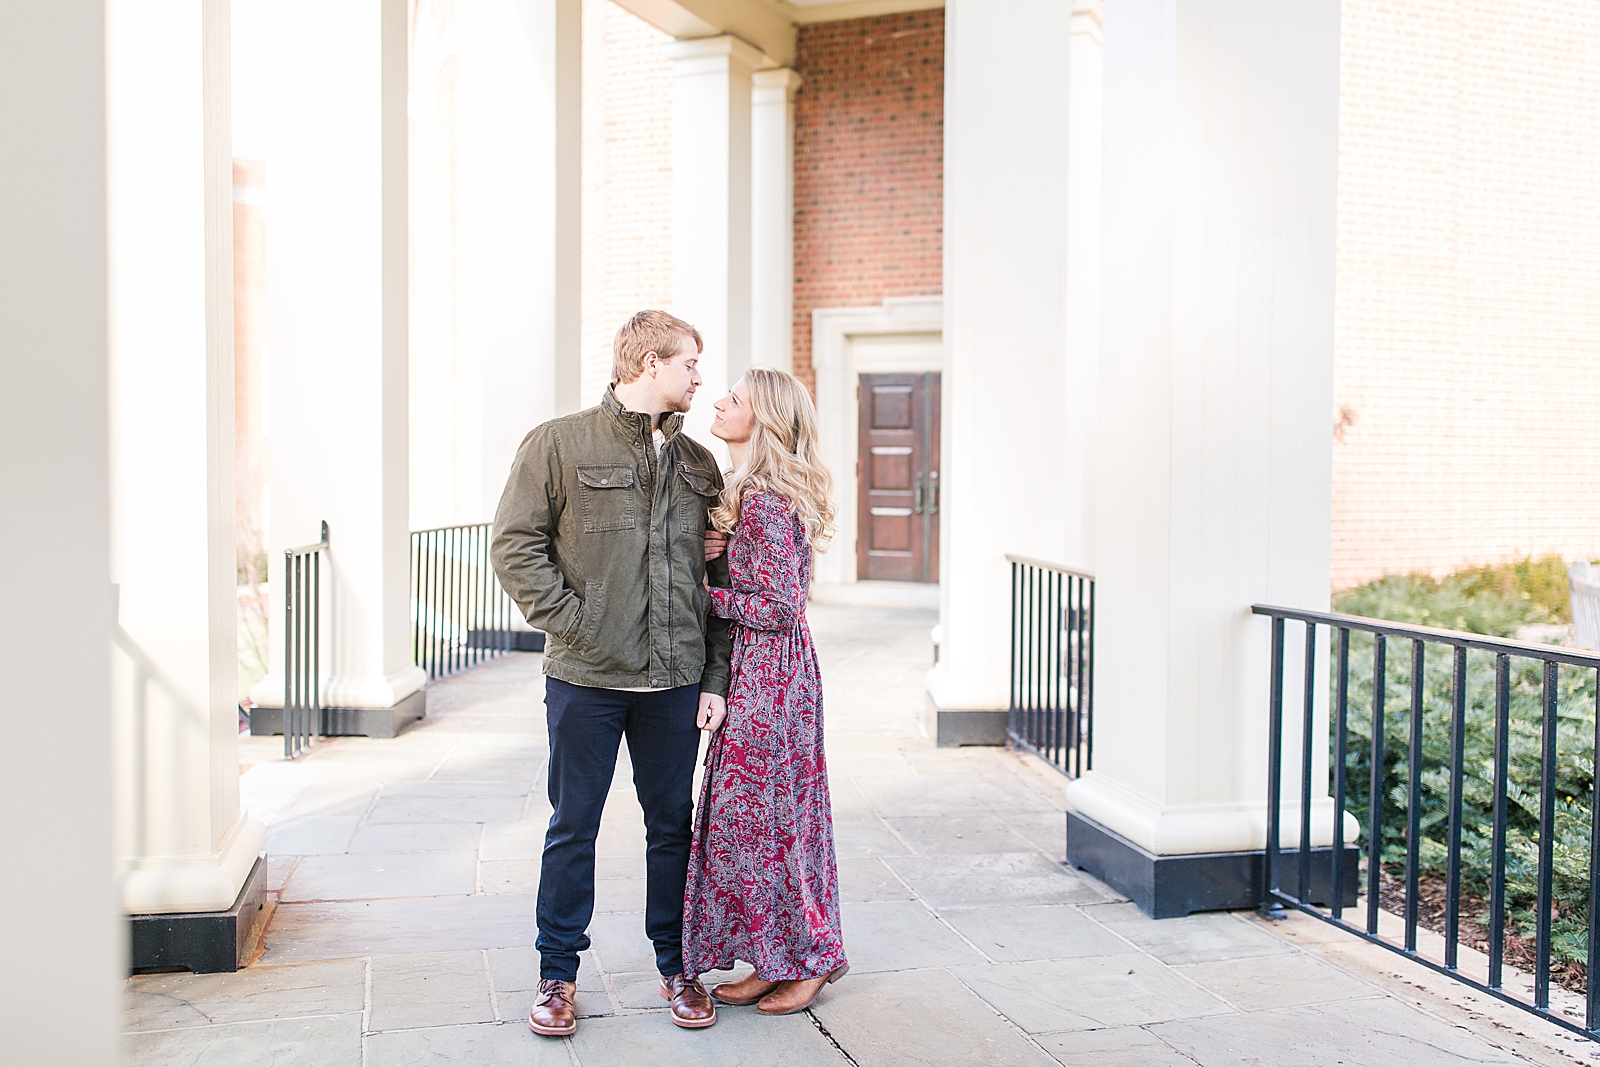 Winston-Salem Engagement Session couple looking at each other in hallway Photo